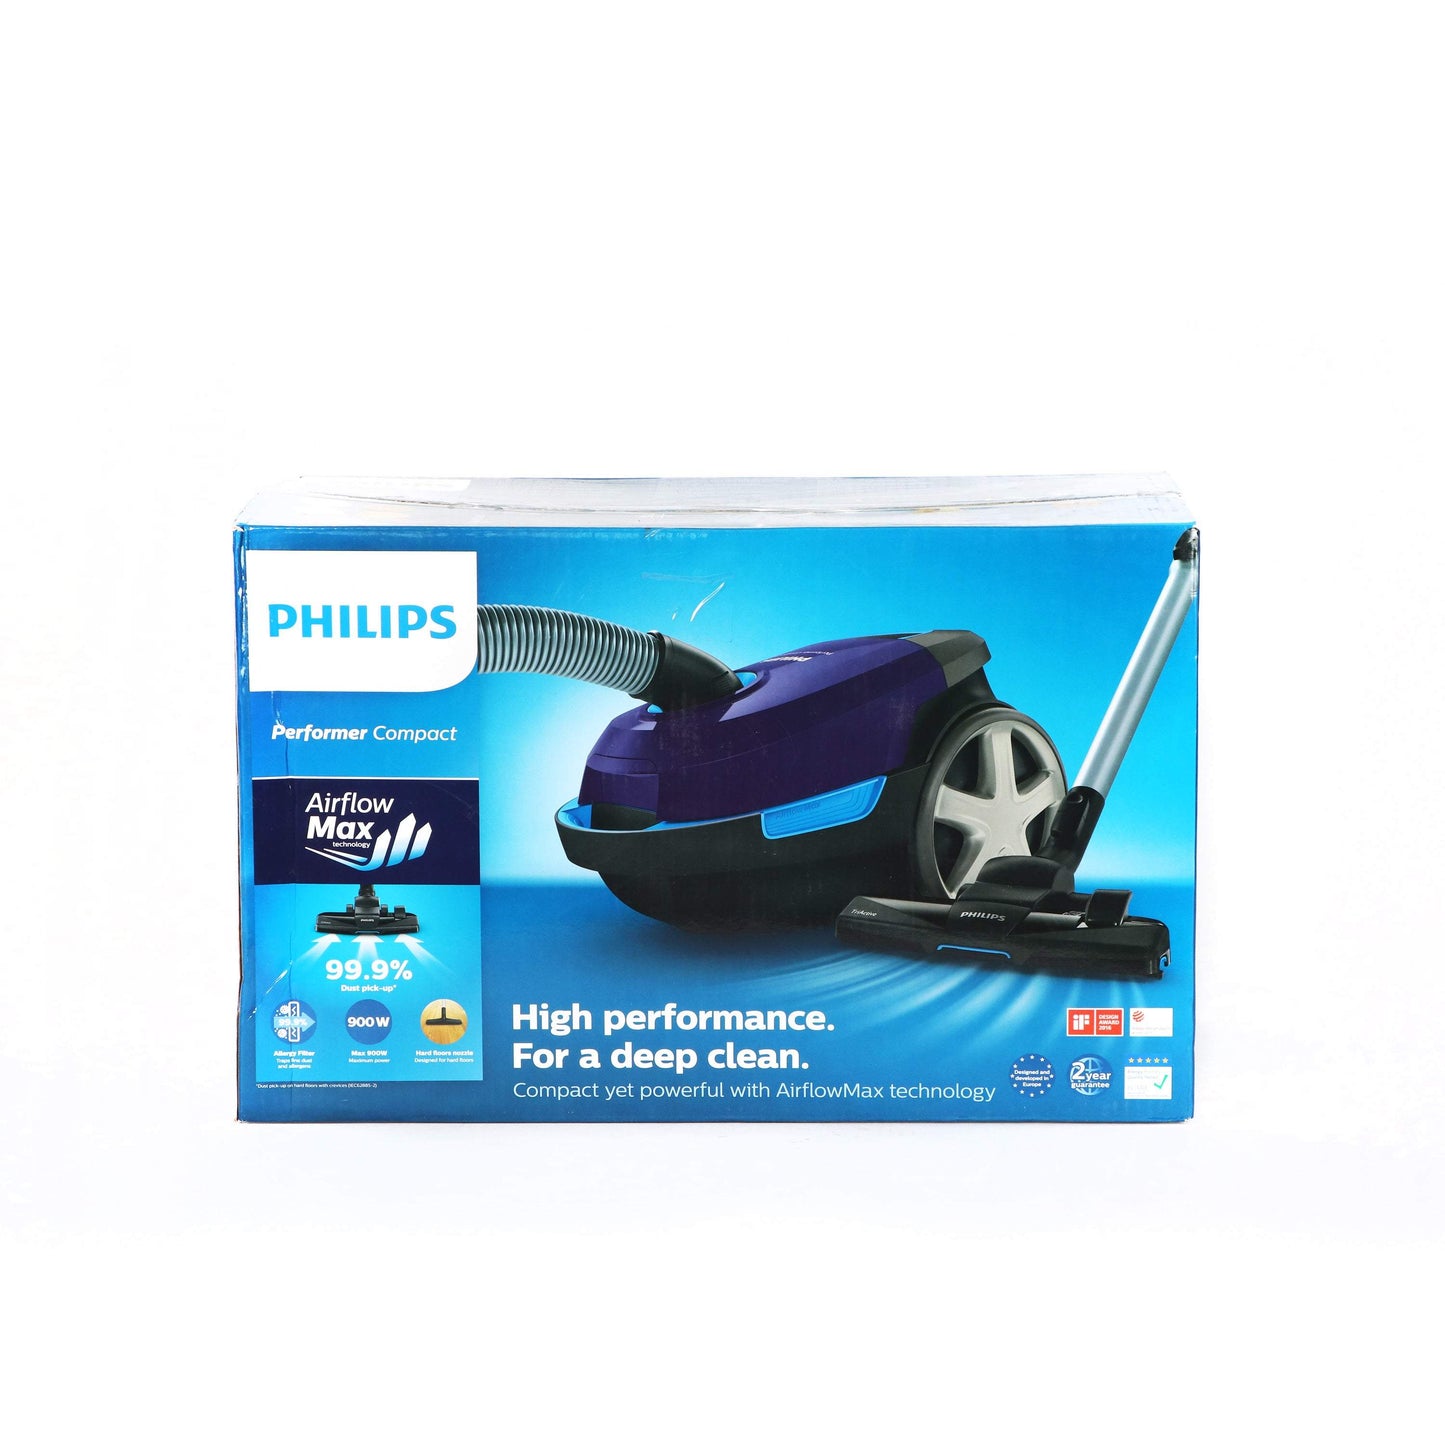 Philips Performer Compact Vacuum cleaner with bag-Royal Brands Co-